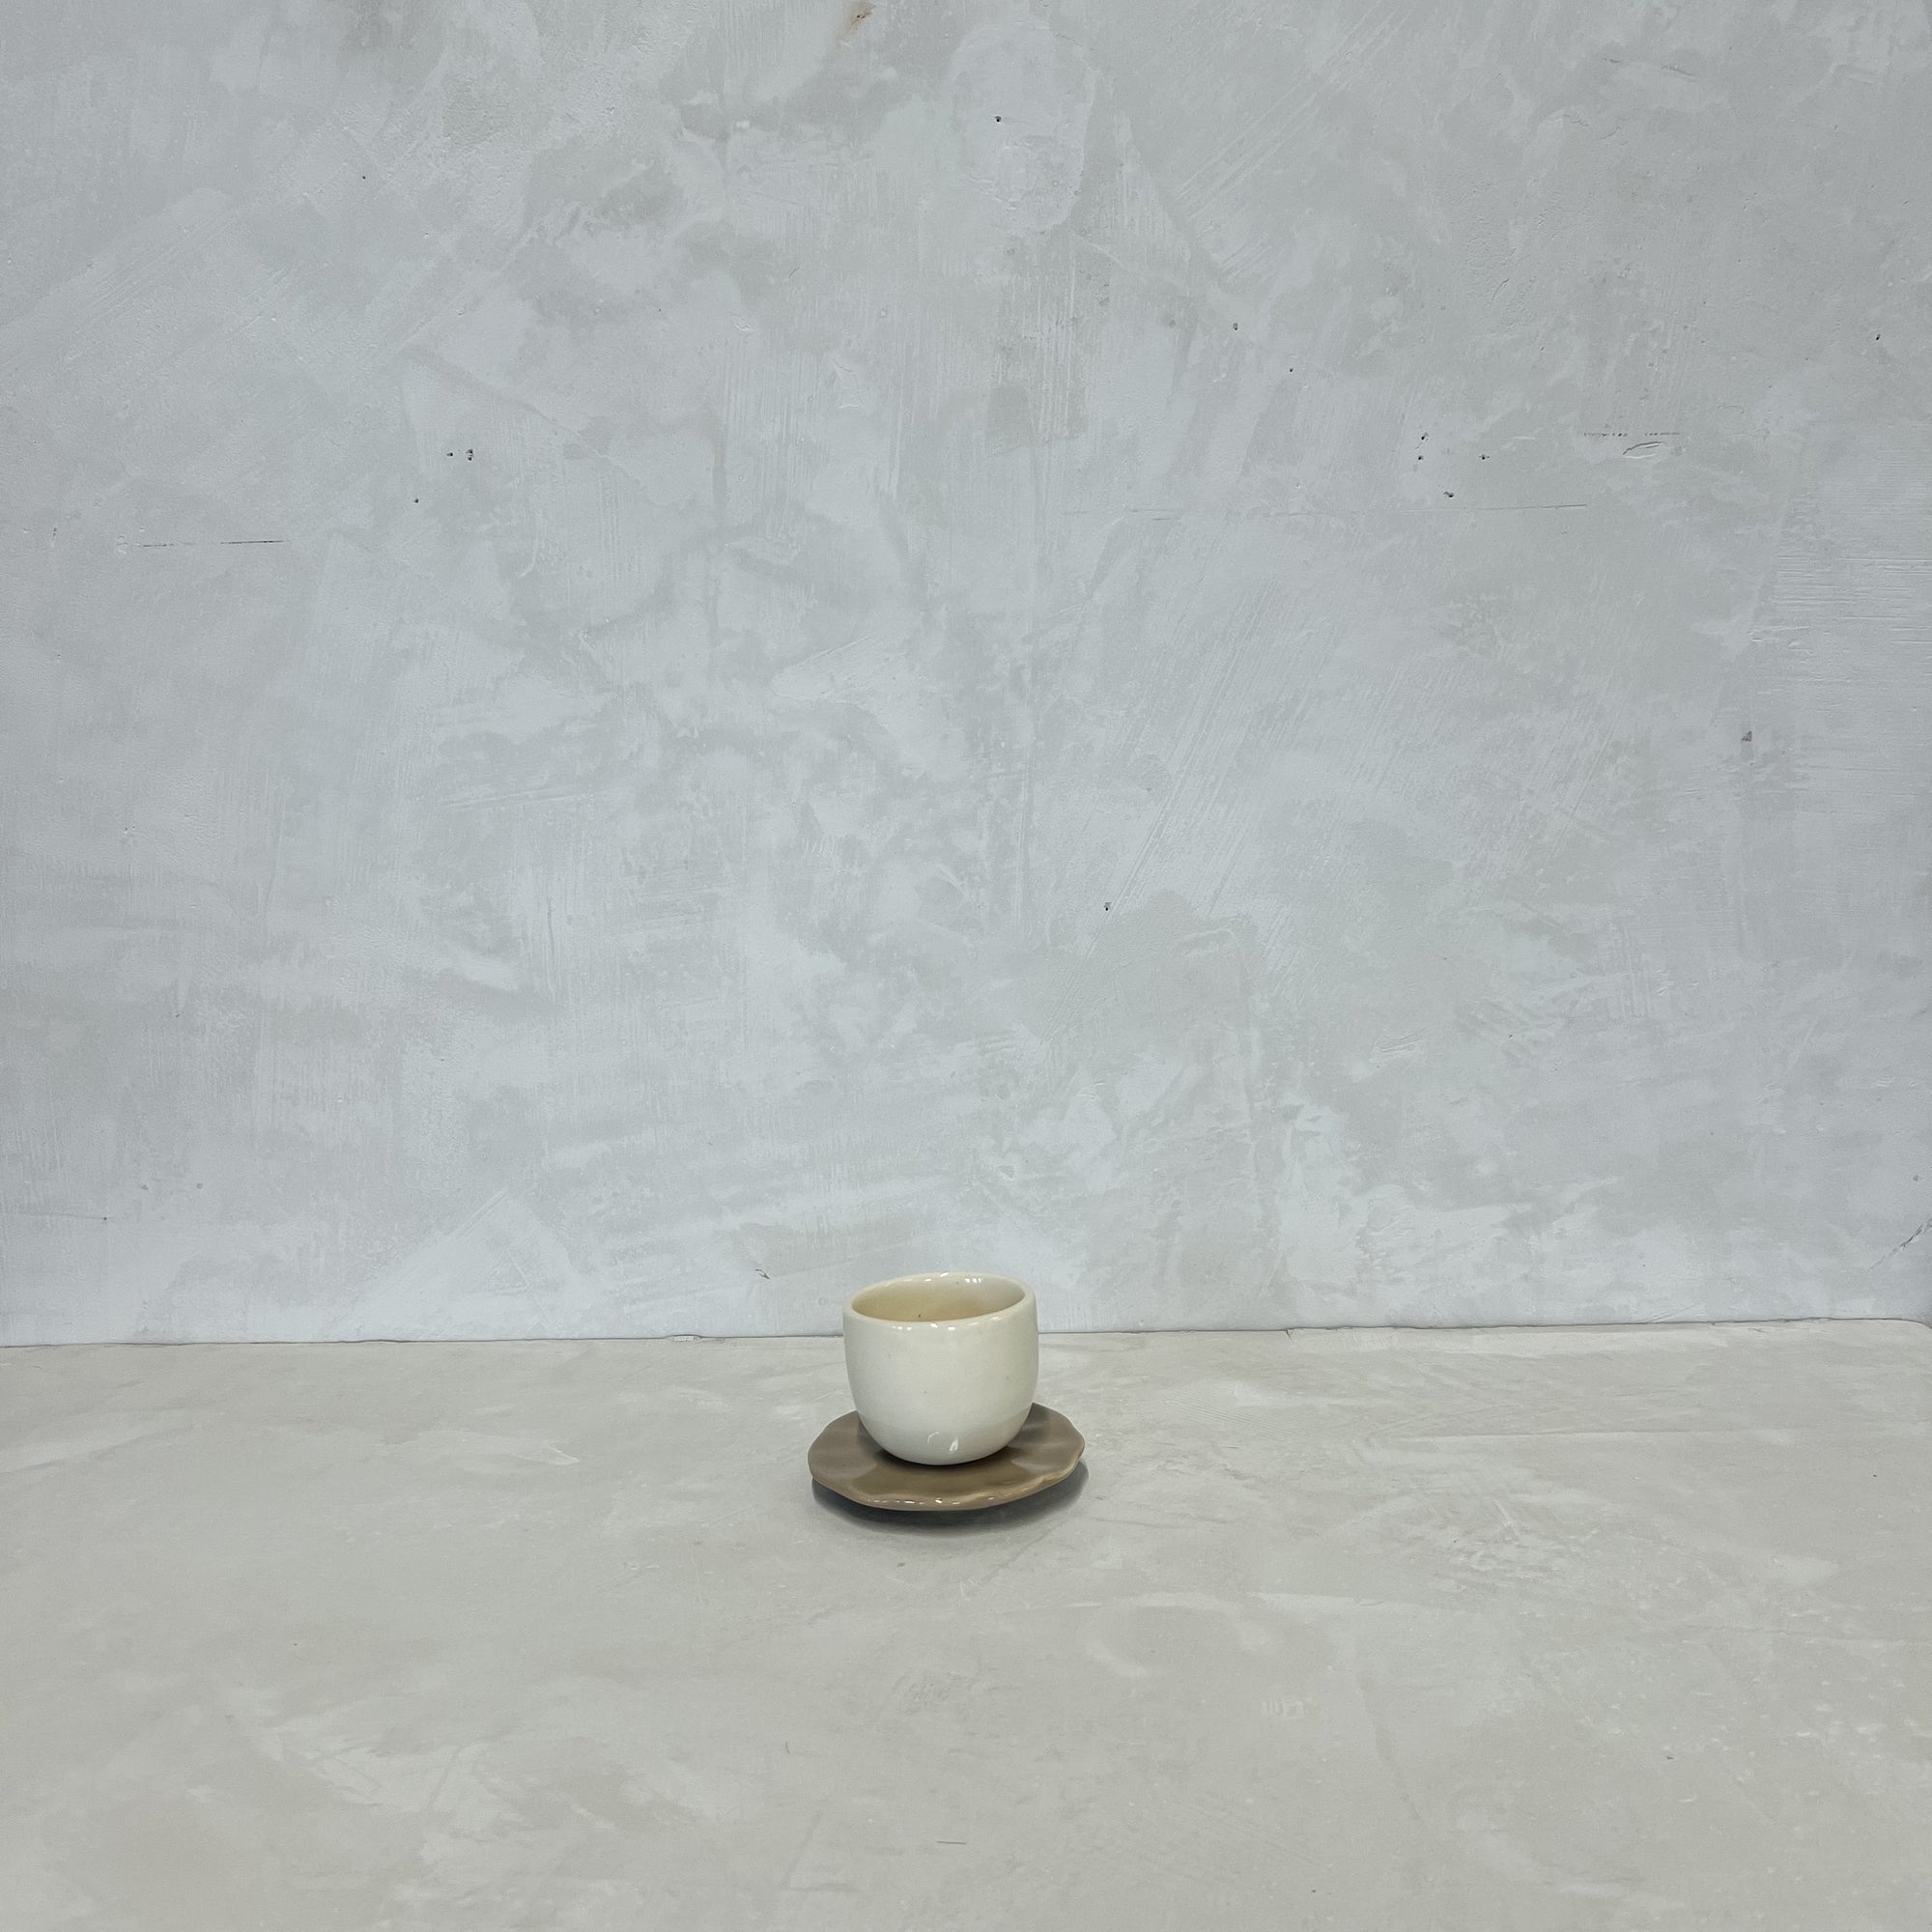 Gloss White Espresso Cup with Fawn Saucer Second